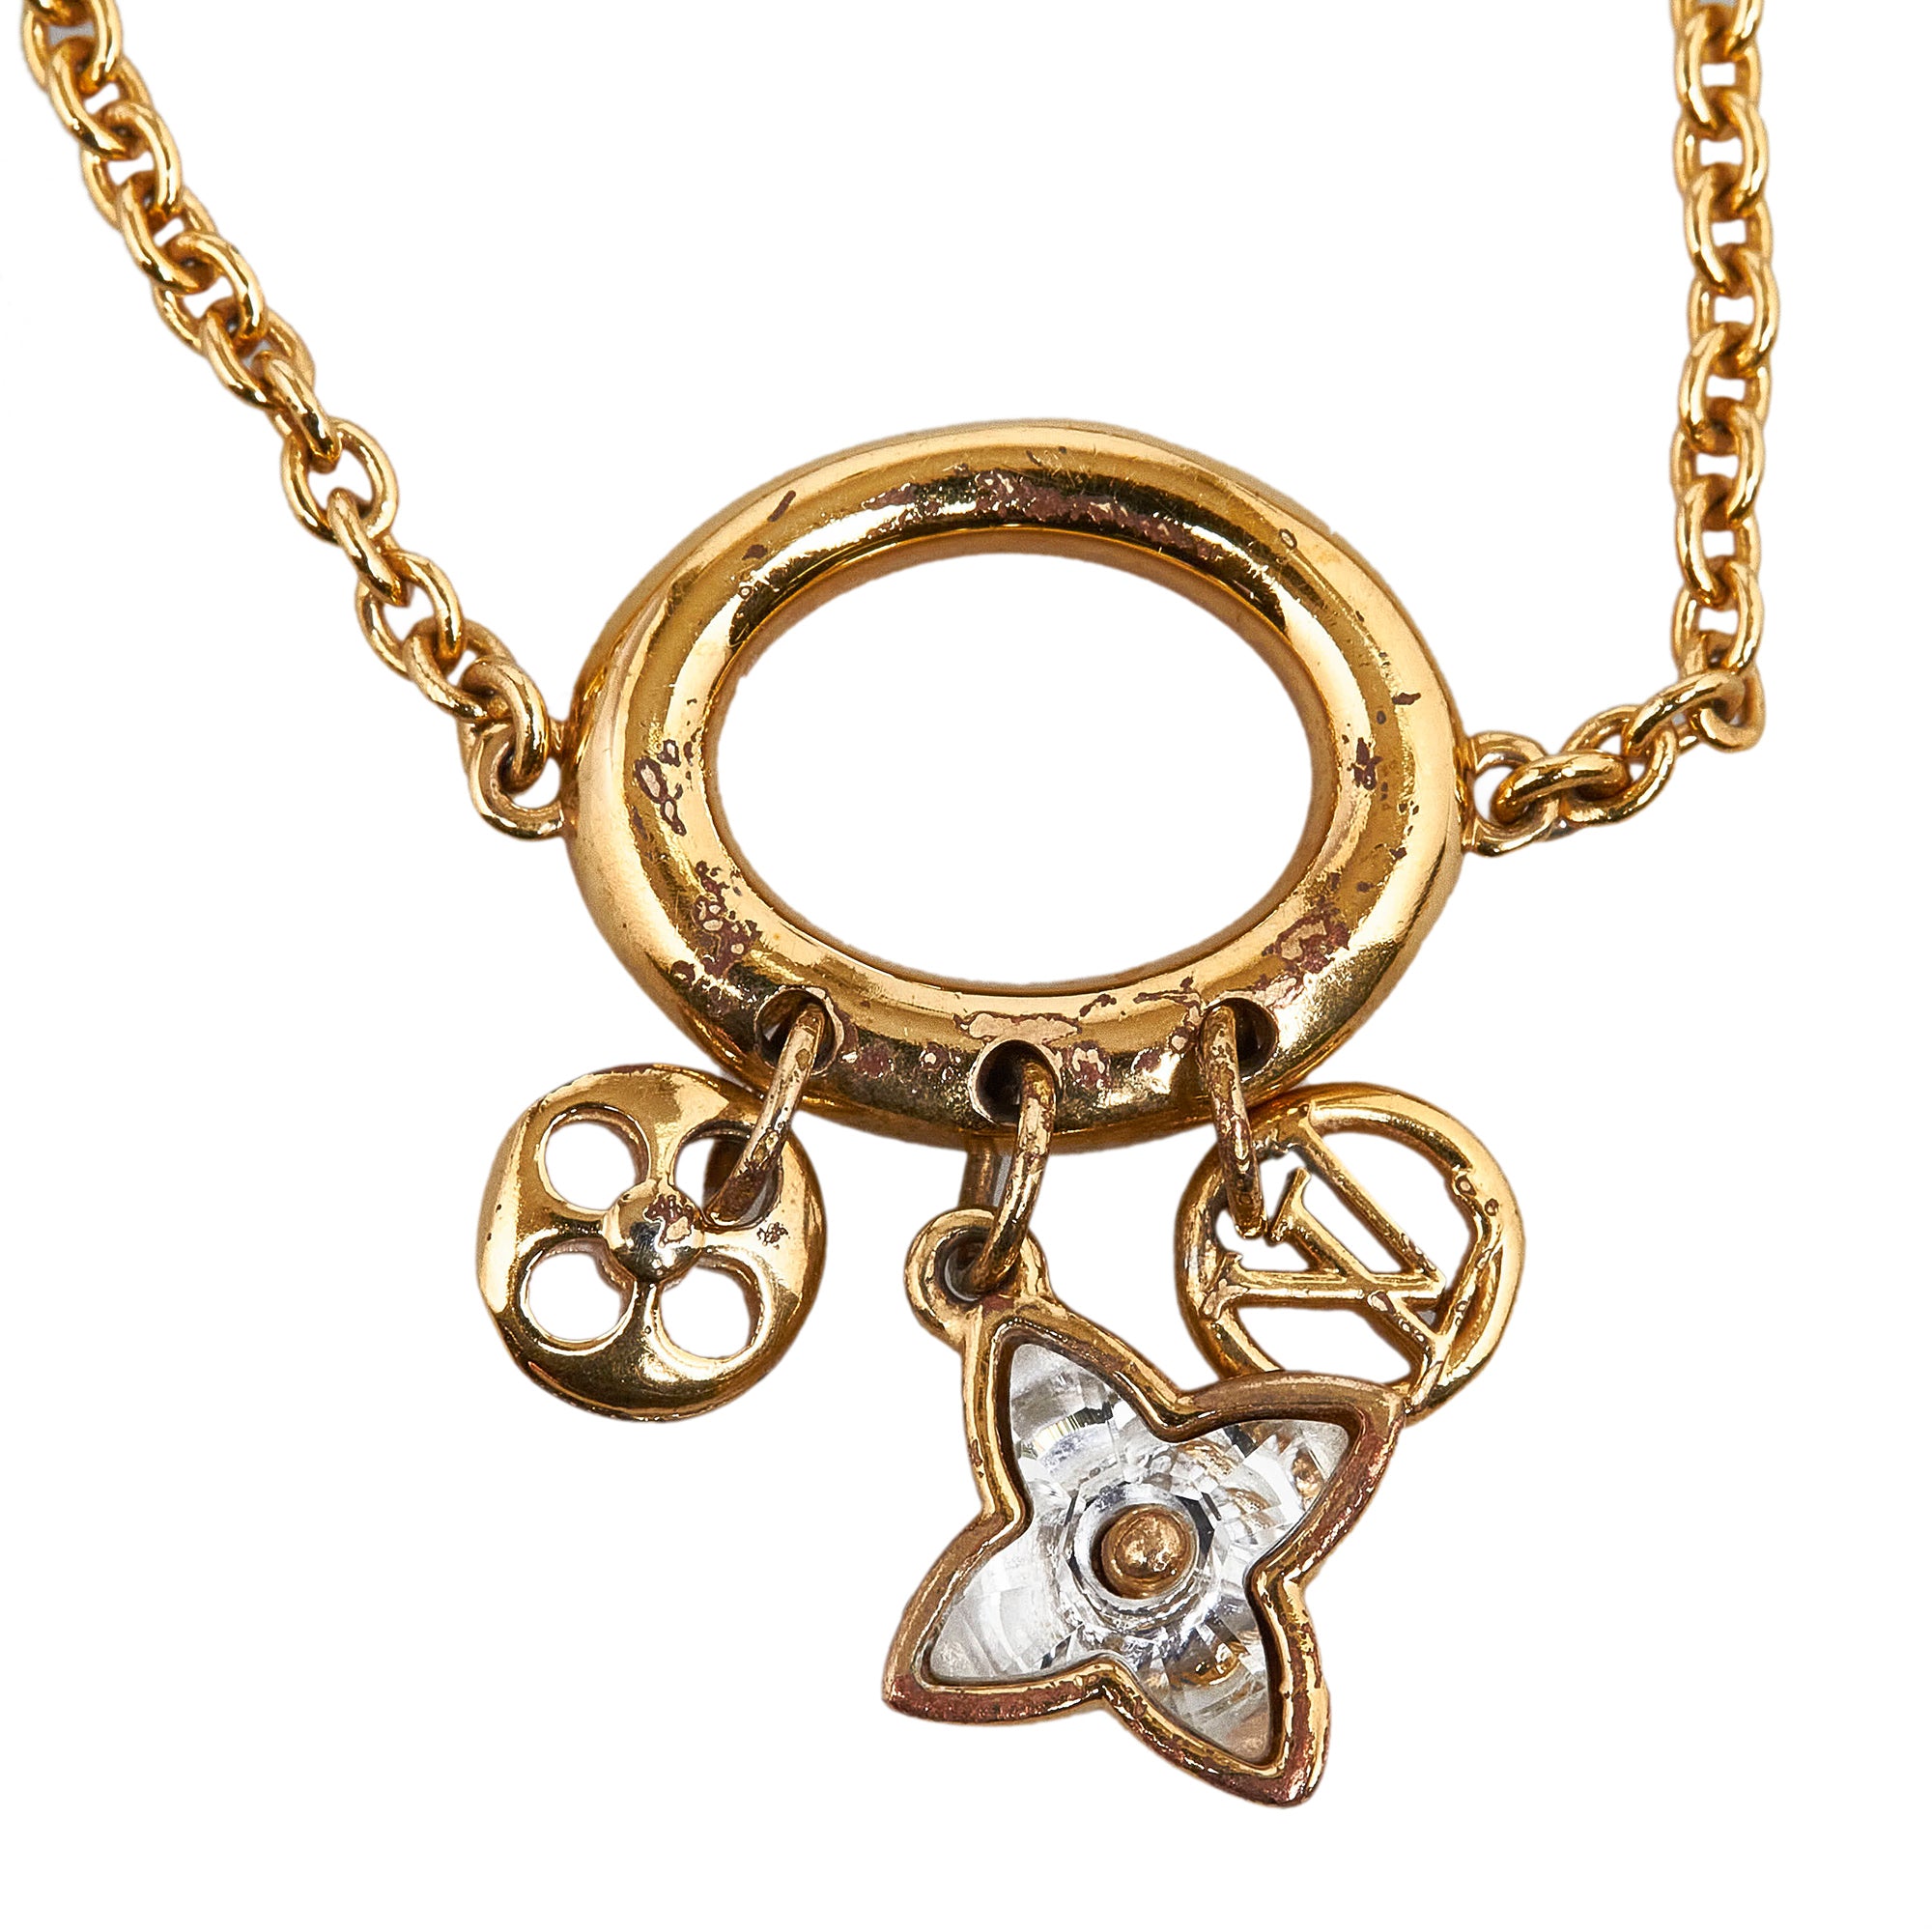 Louis Vuitton Blooming Strass Necklace - Brass Chain, Necklaces